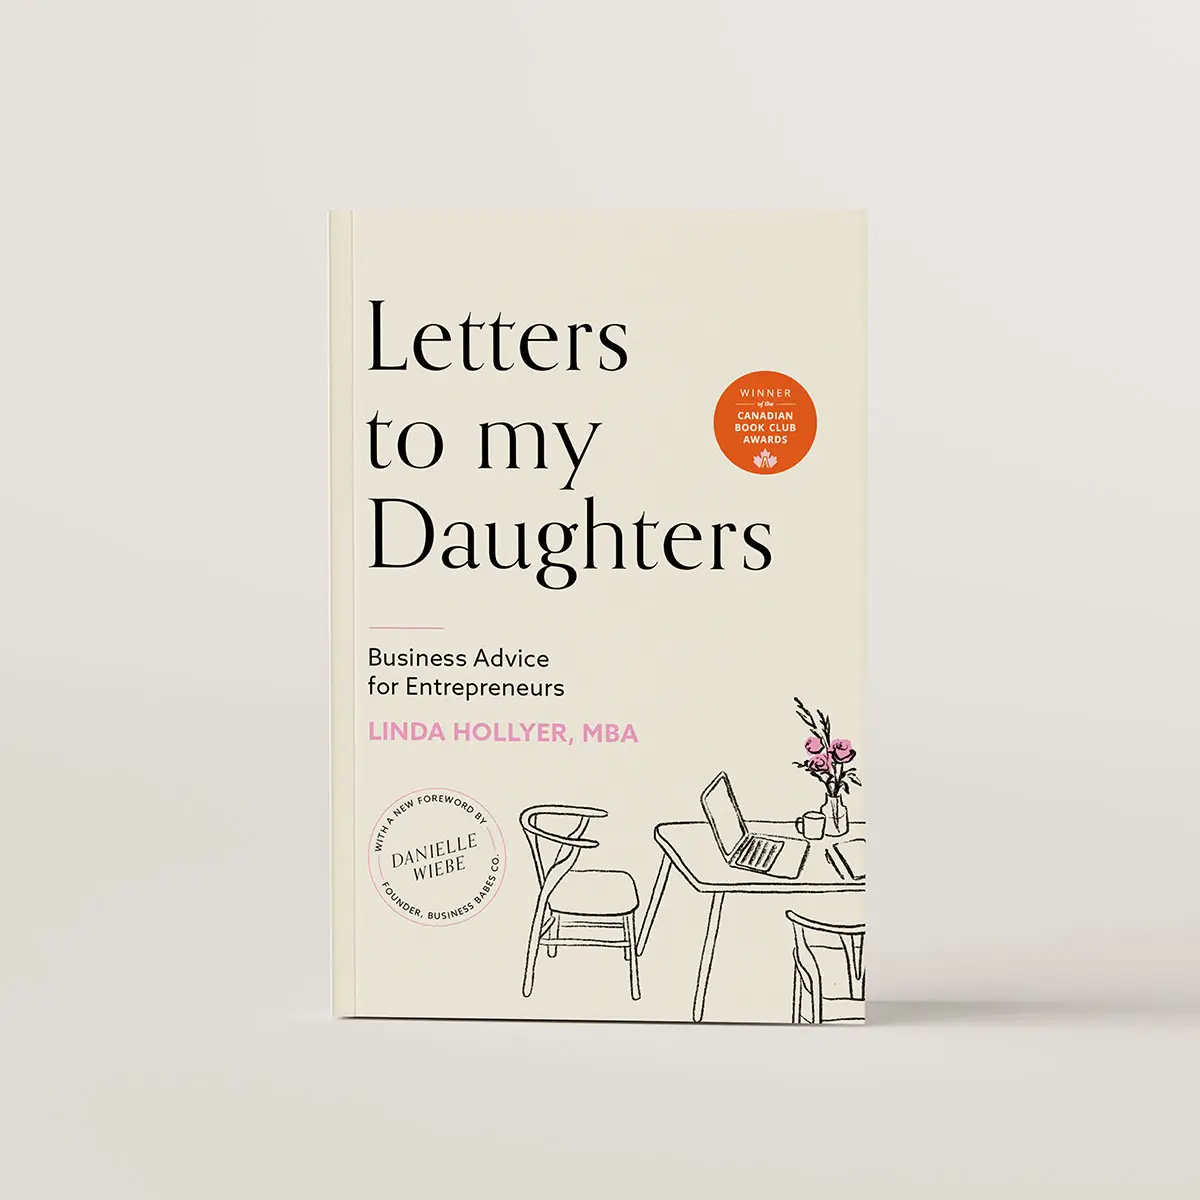 Book cover of Letters to my Daughters to Linda Hollyer. The cover is cream with a black line drawing of a desk and chairs with a laptop on it and a vase of flowers.